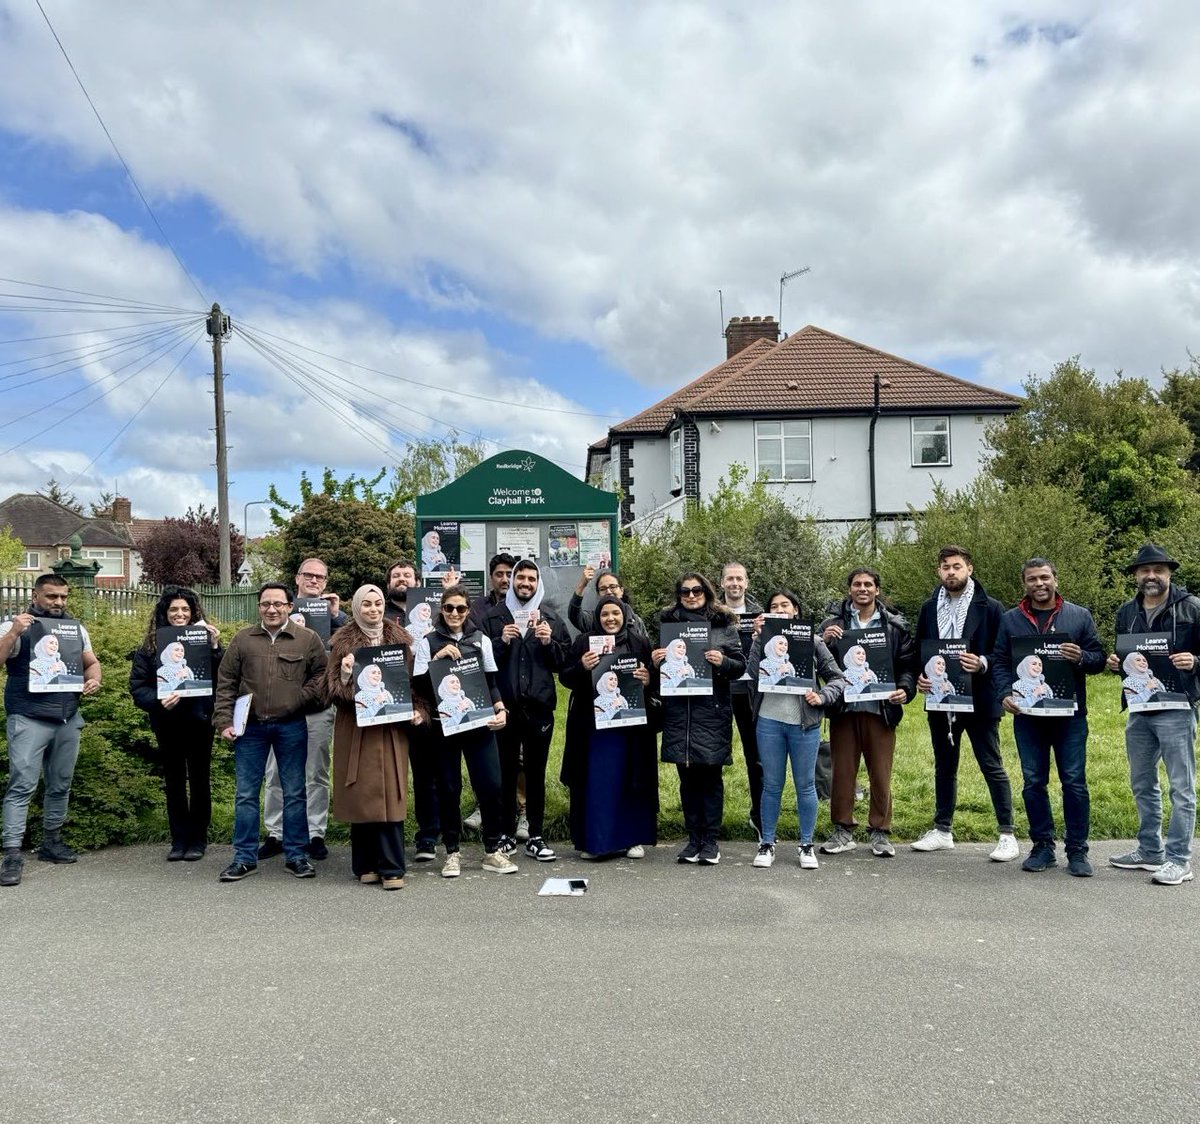 After a brilliant canvassing session, my volunteers and I reflect (over pizza!) on the conversations we have had on the doorstep. My neighbours in Ilford North are fed up with politics that remains distant, unresponsive and beholden to special interests. We are building a